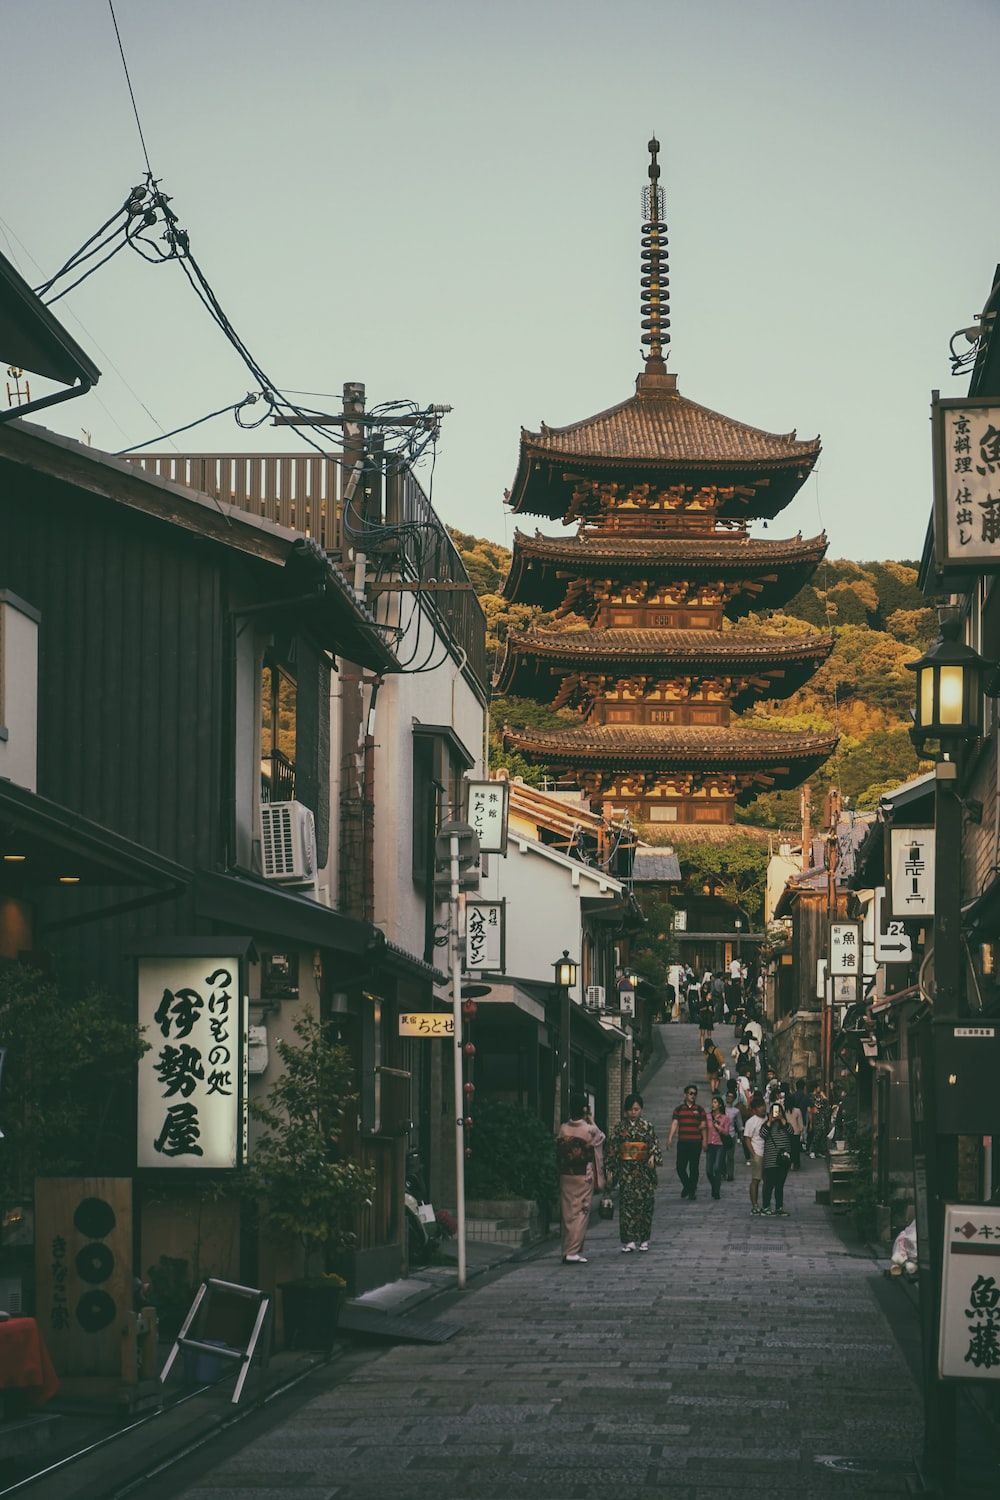 A street in Kyoto, Japan with a pagoda in the background - Japanese